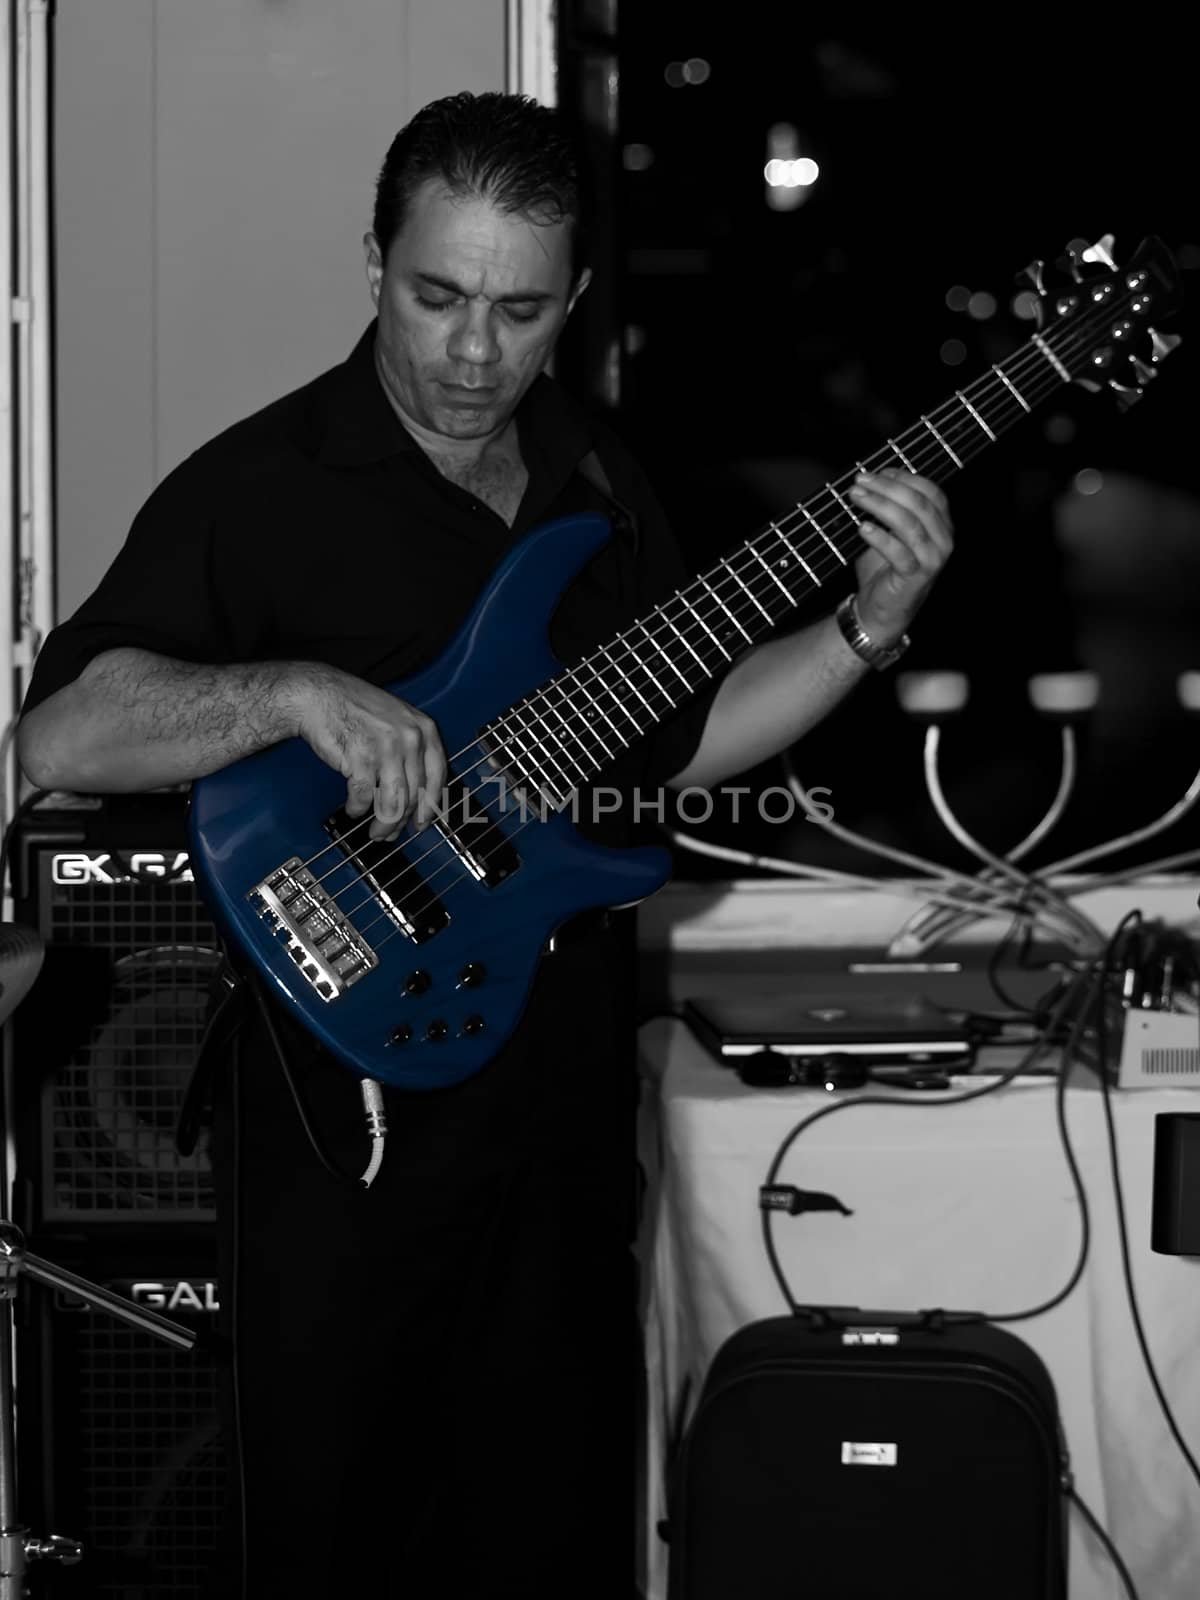 ST JULIANS, MALTA - AUG 28 - Bassist performing during a private function on 28th August 2009